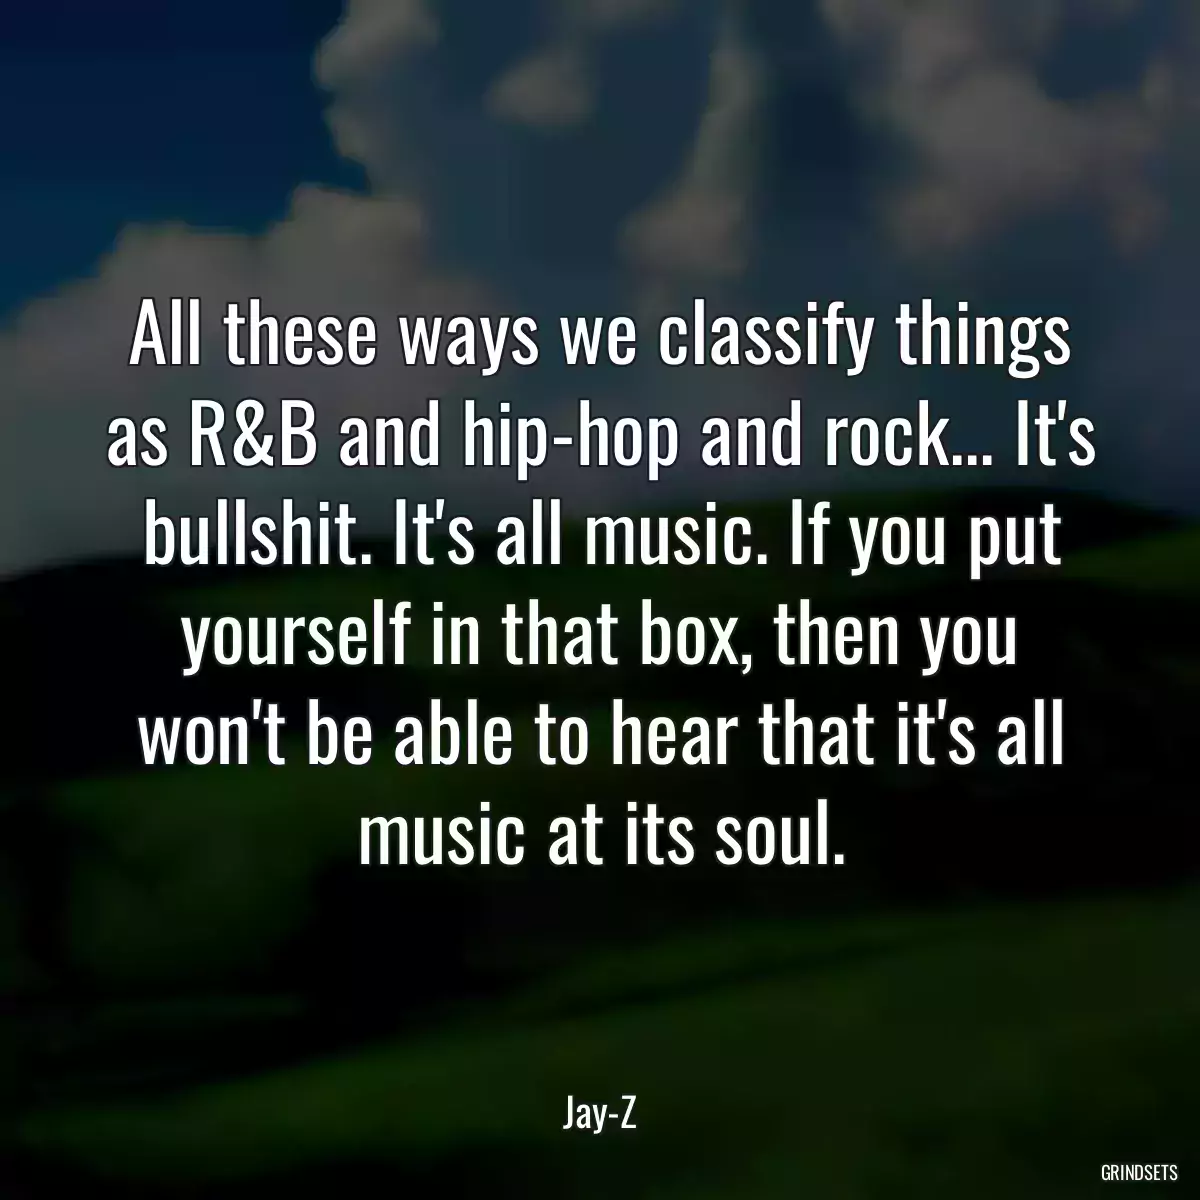 All these ways we classify things as R&B and hip-hop and rock... It\'s bullshit. It\'s all music. If you put yourself in that box, then you won\'t be able to hear that it\'s all music at its soul.